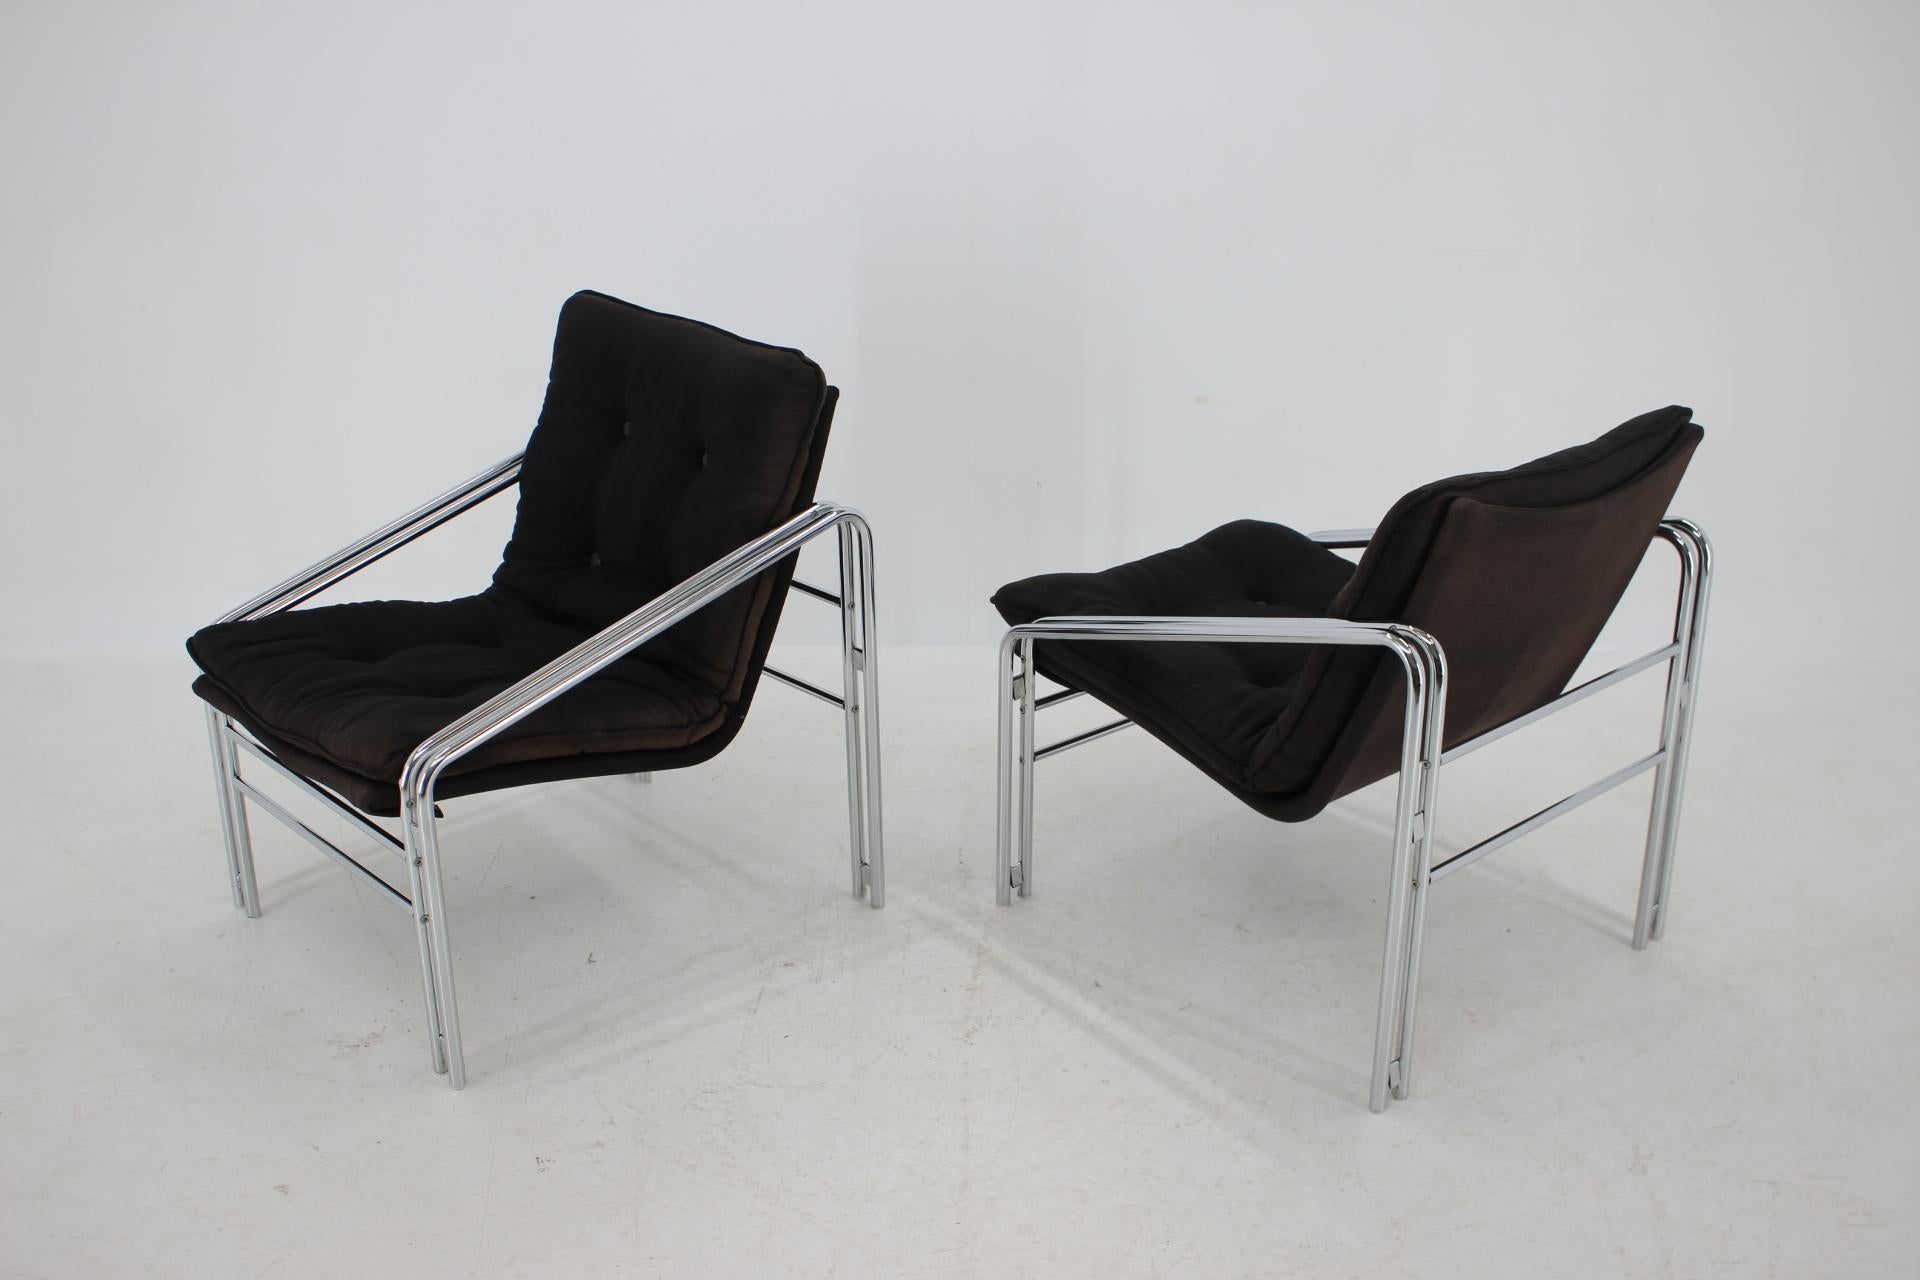 - Made in Germany,
- 1970
- Made of chrome, fabric
- Very comfortable
- Good, original condition.